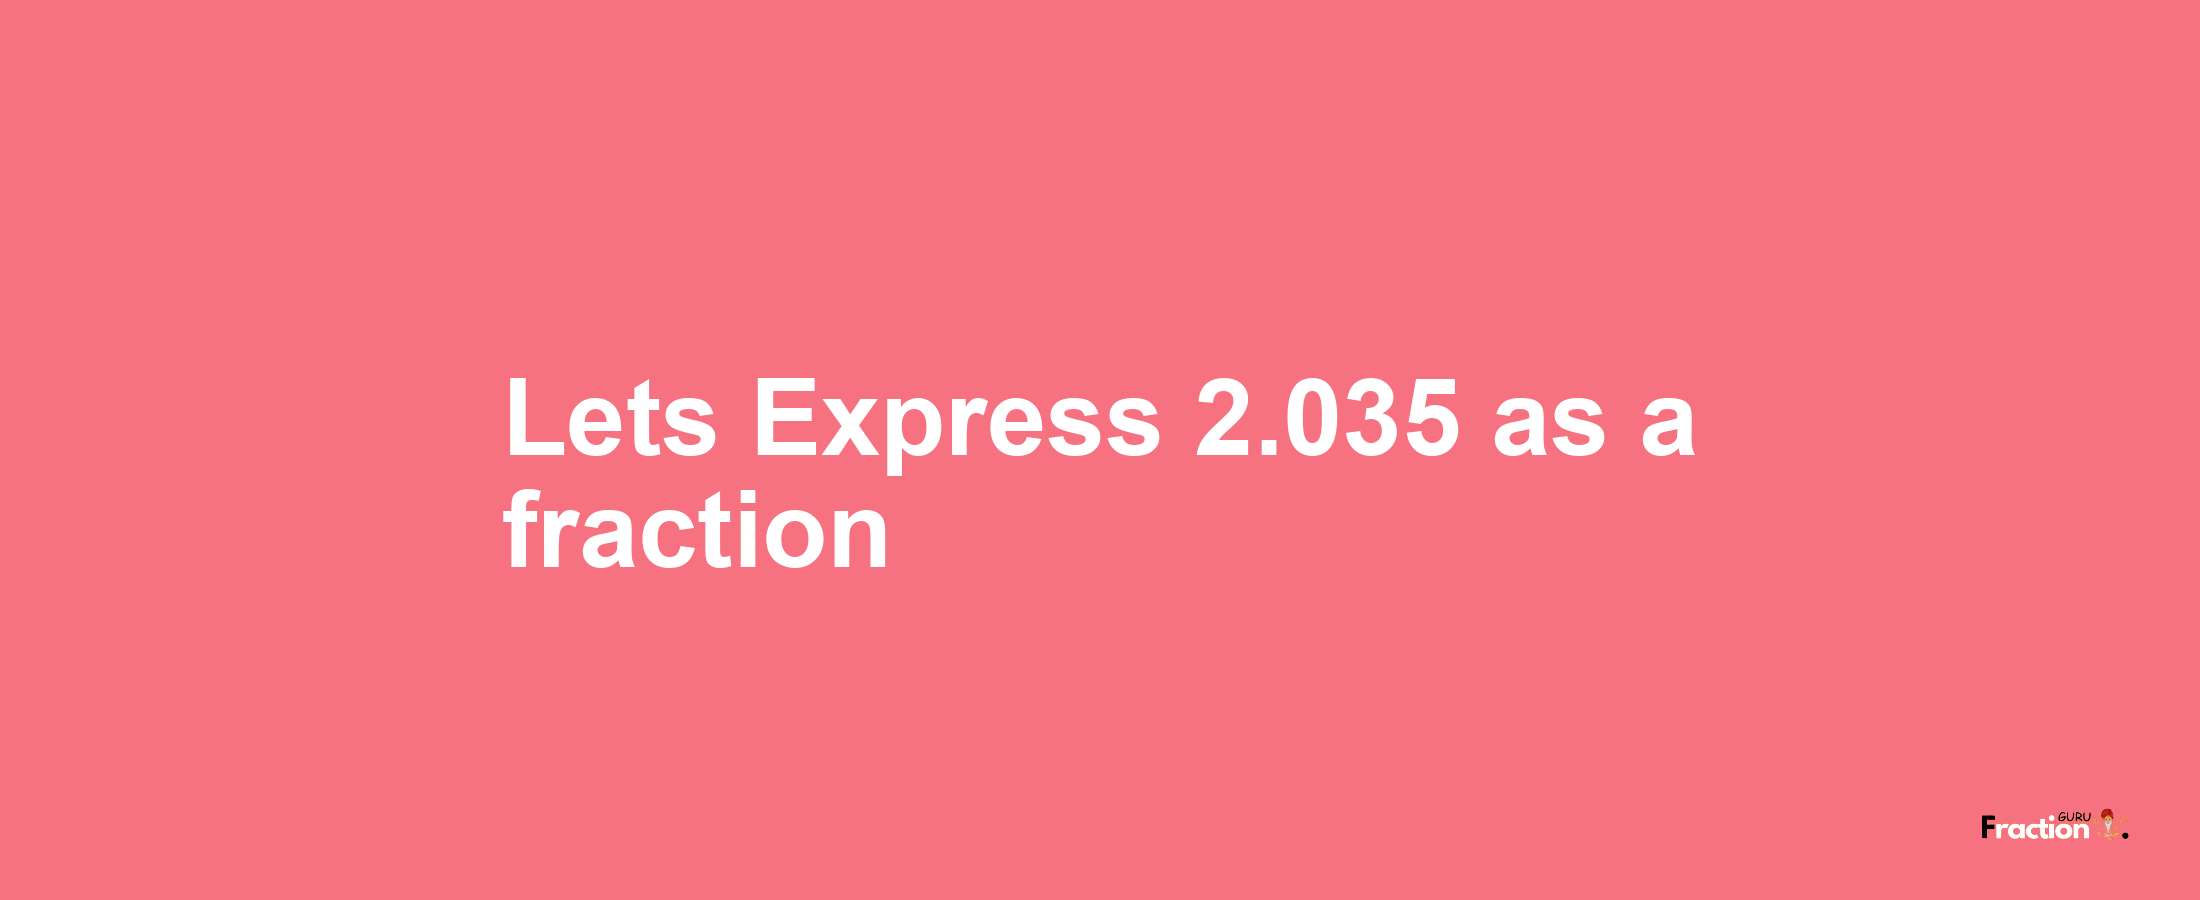 Lets Express 2.035 as afraction